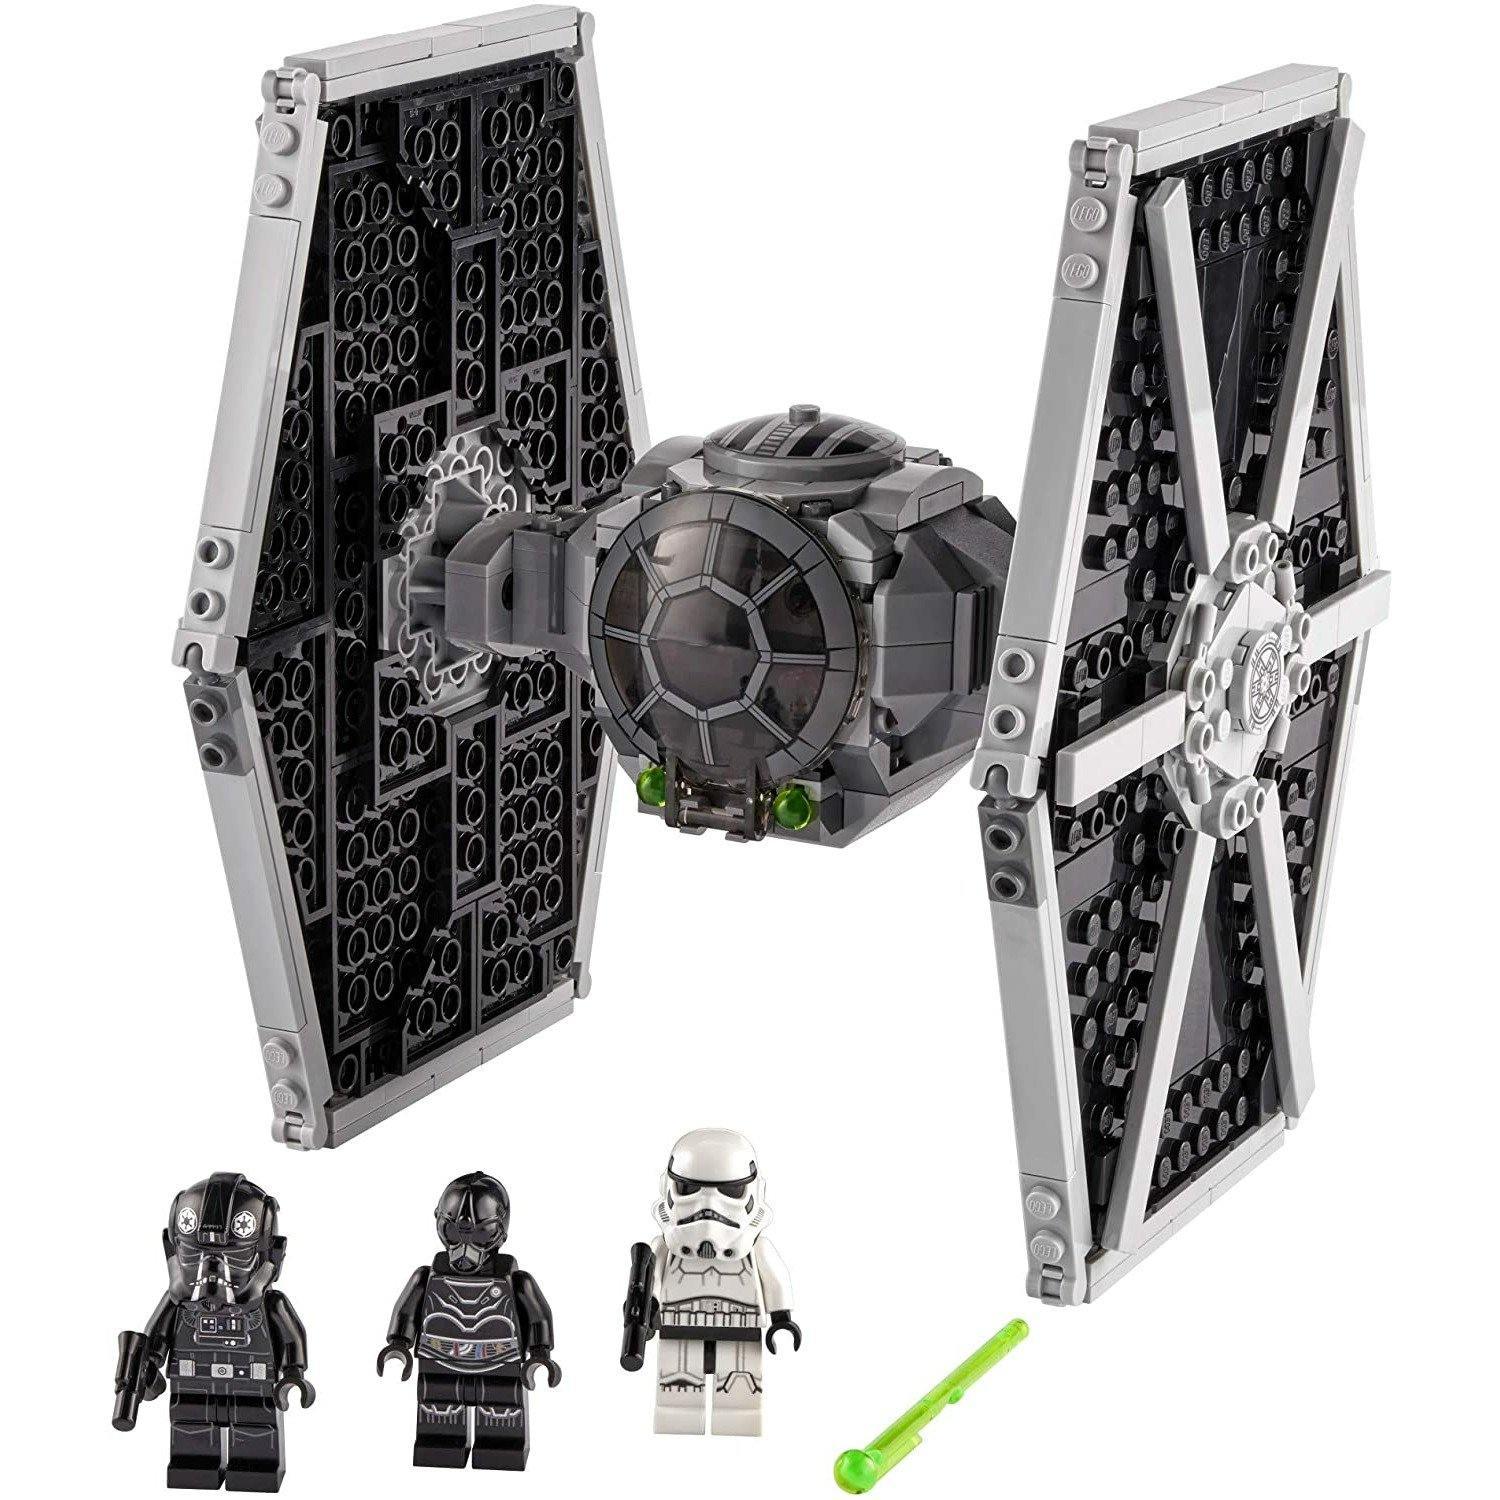 LEGO Star Wars Imperial TIE Fighter 75300 Building Kit (432 Pieces) - BumbleToys - 5-7 Years, Boys, LEGO, OXE, Pre-Order, star wars